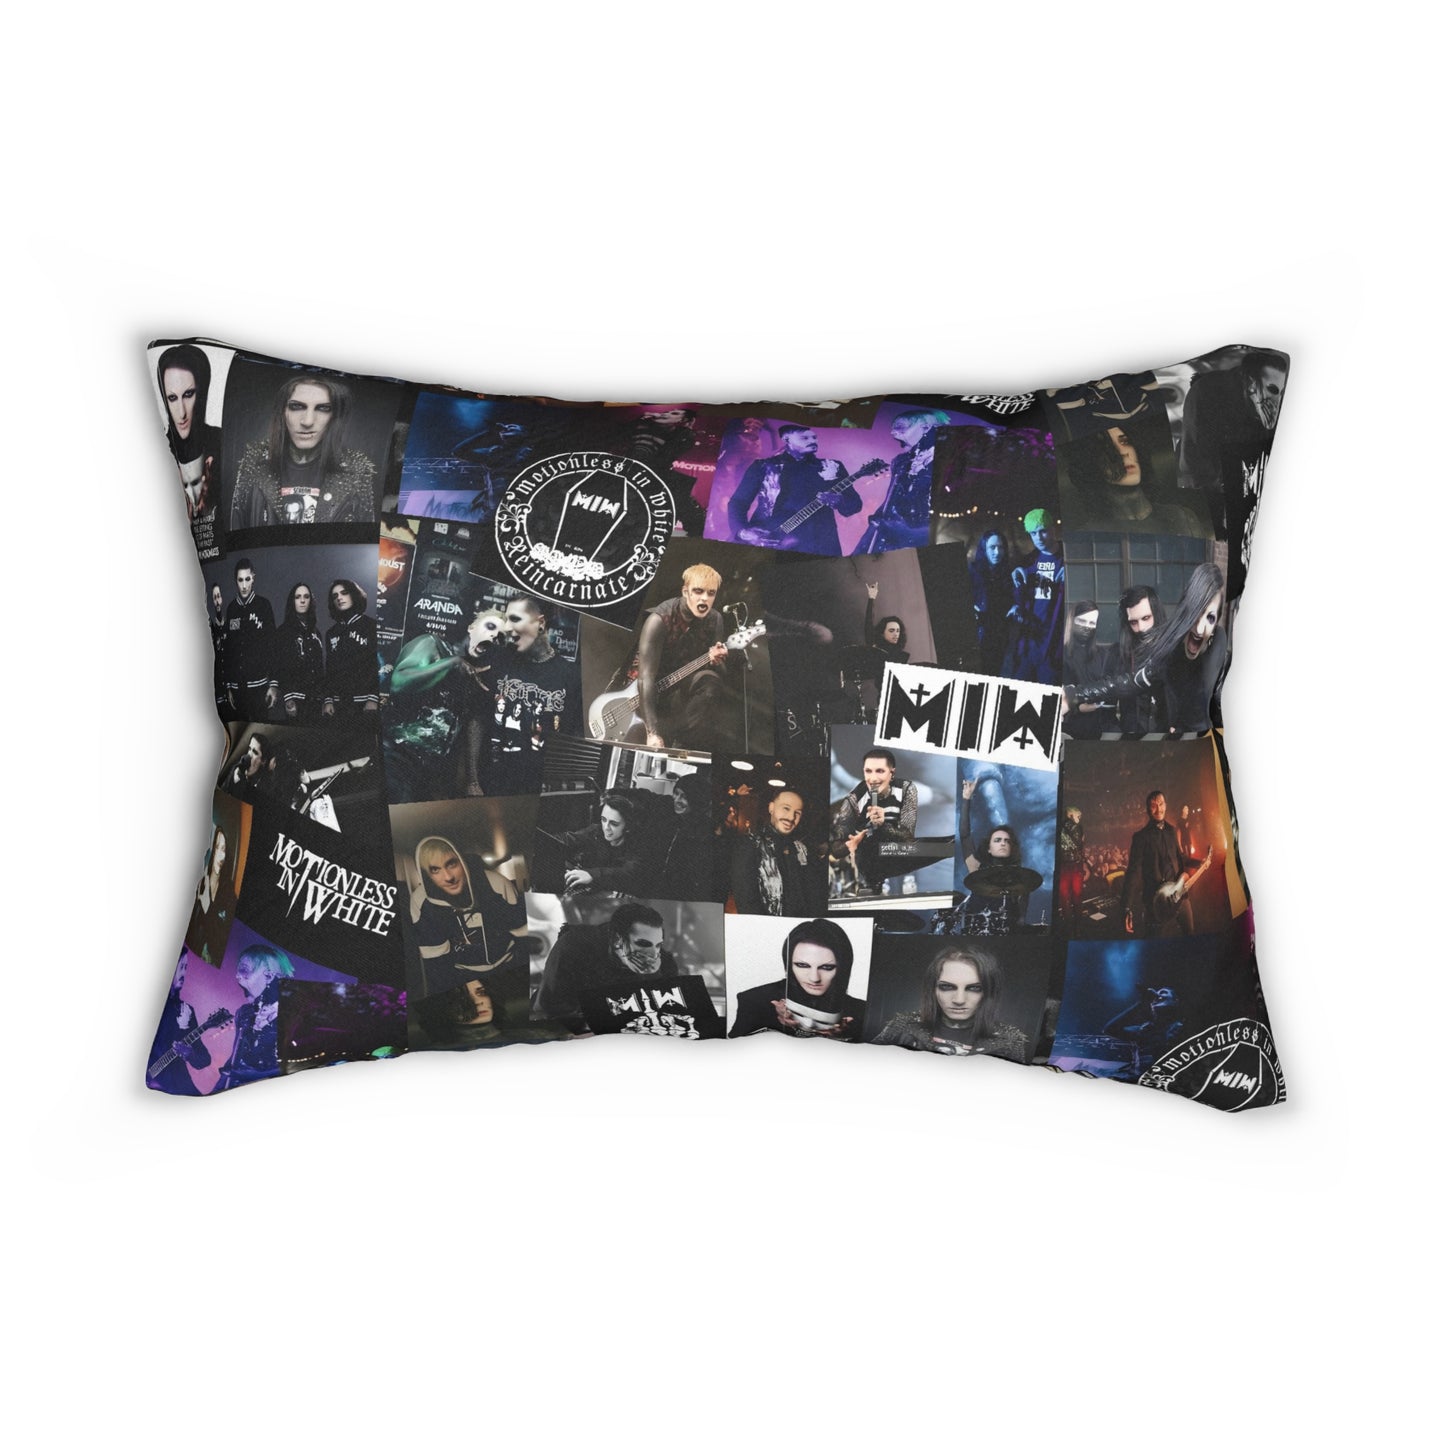 Motionless In White Photo Collage Polyester Lumbar Pillow